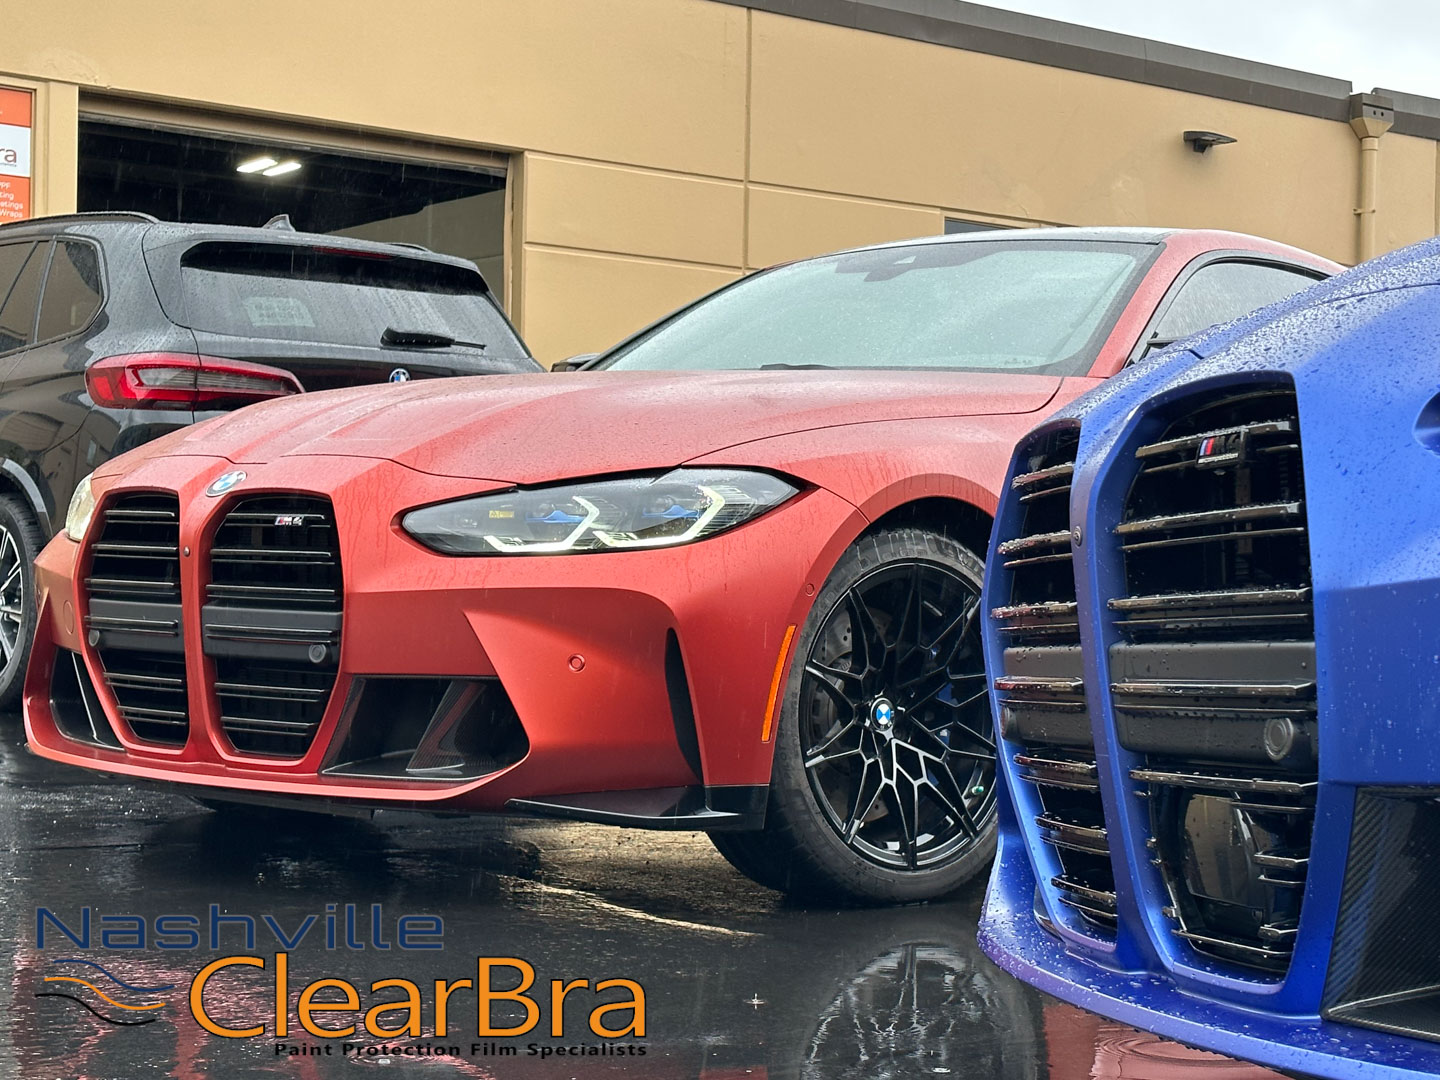 Xpel Ultimate Paint Protection Film - Vancouver ClearBra